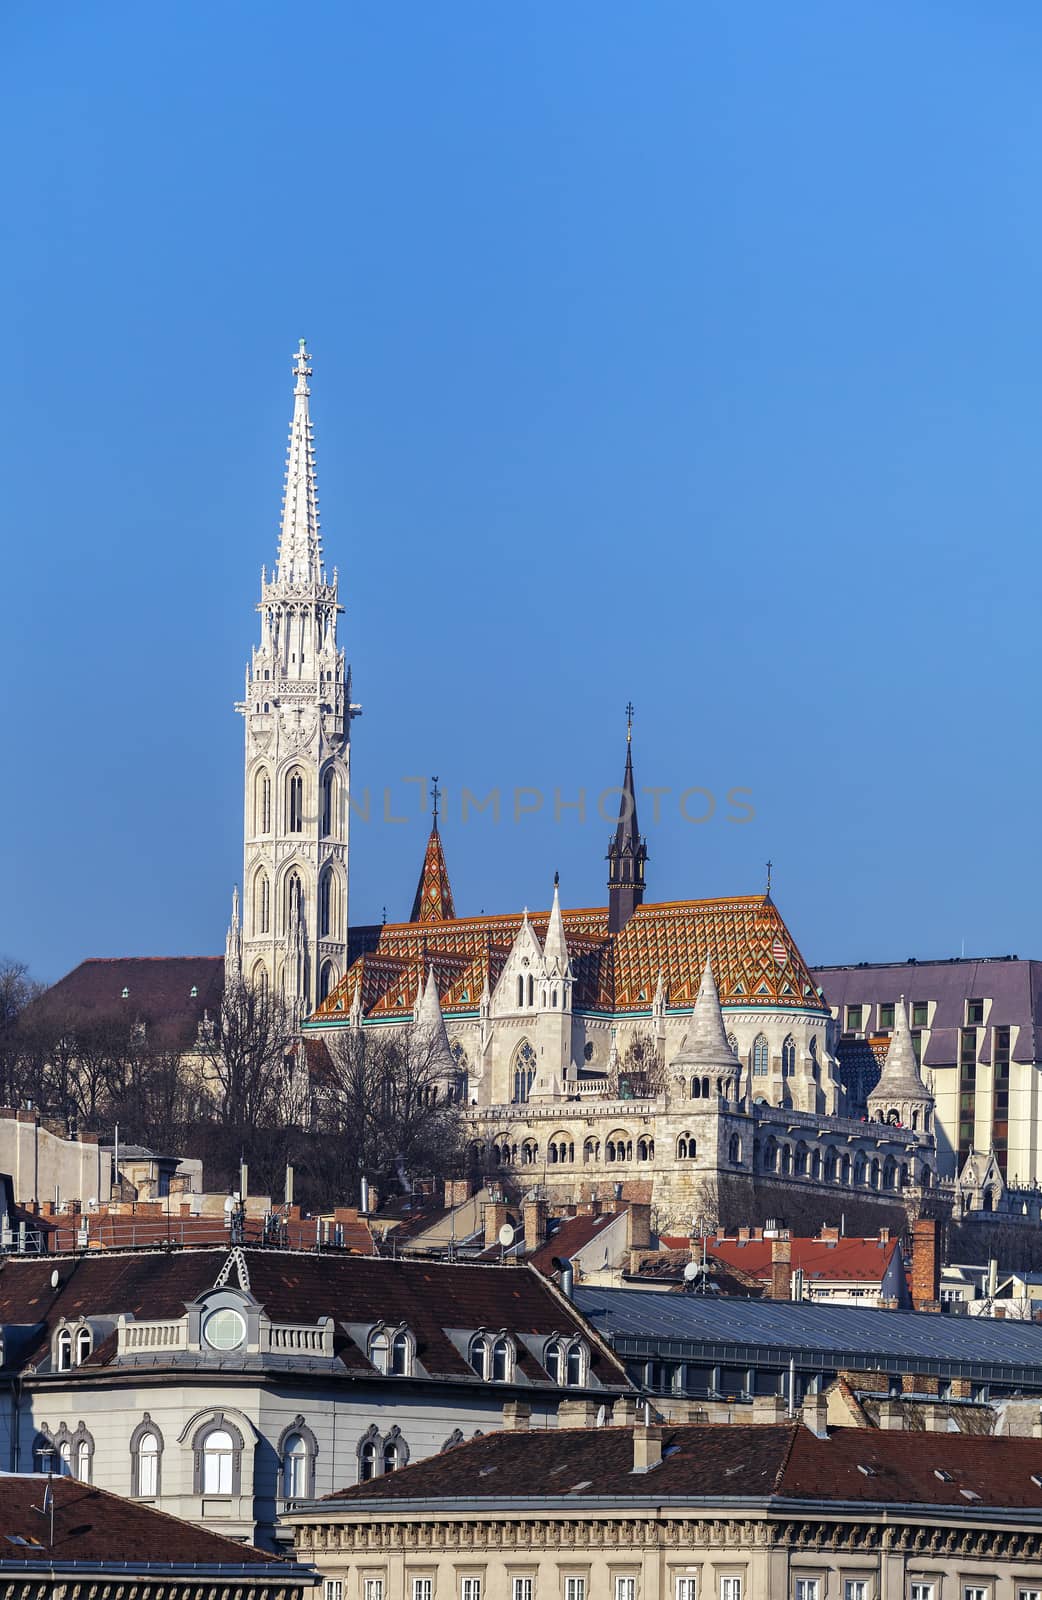 View of Matthias Church and Fisherman's Bastion in Budapest from Chain bridge